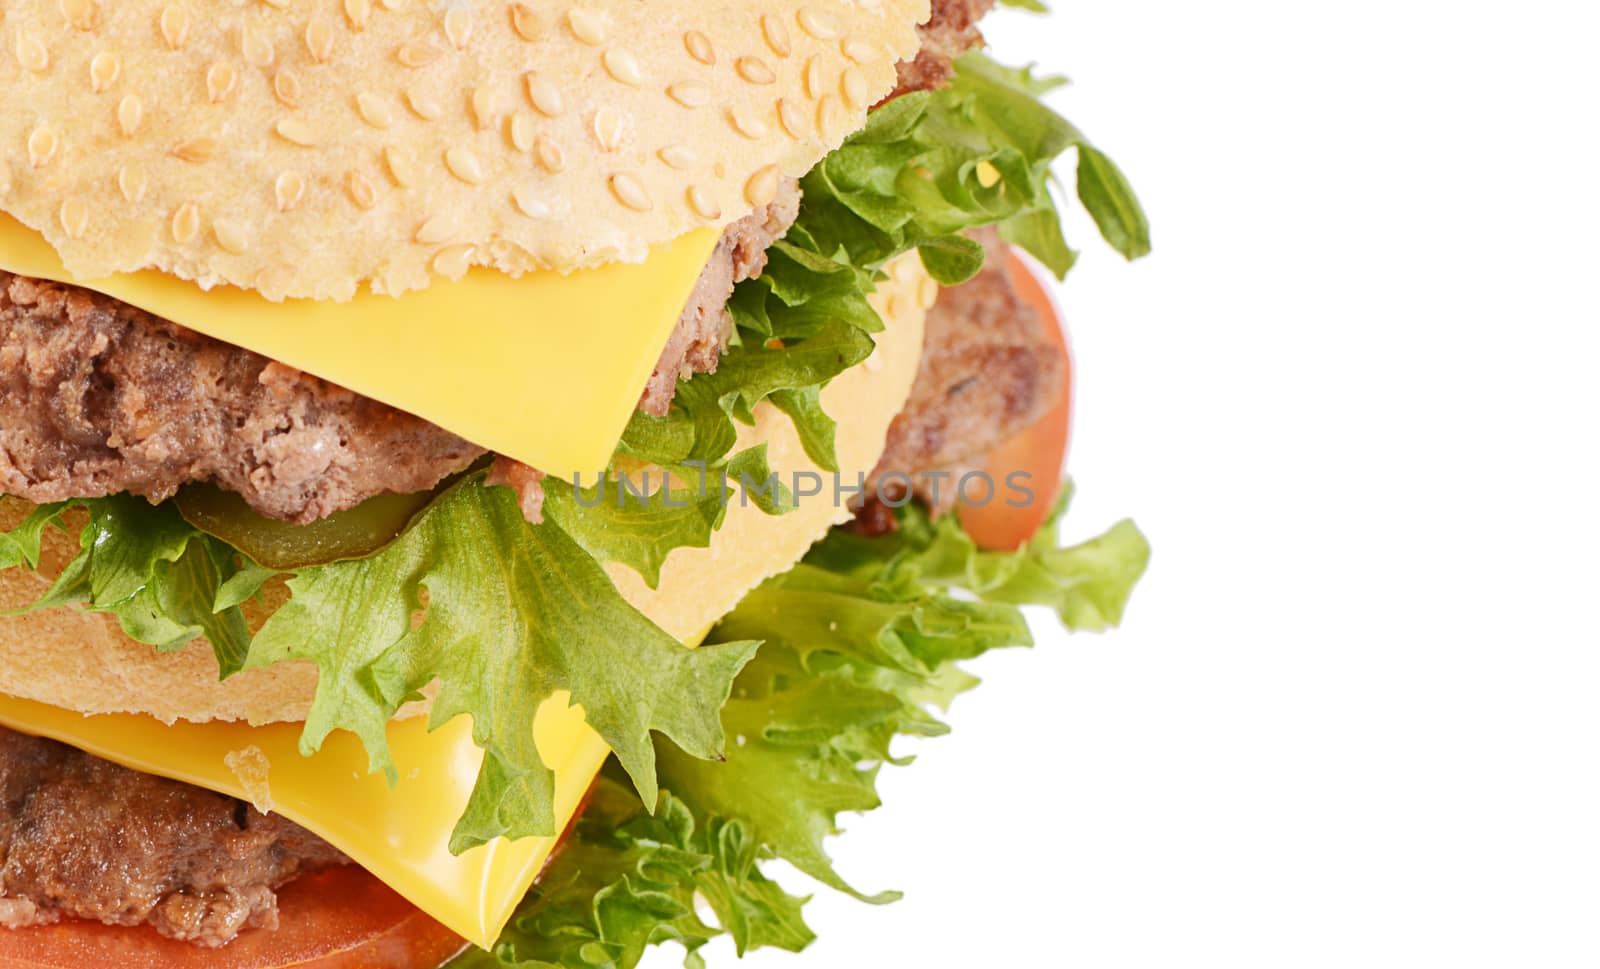 Hamburger with cutlet and cheese on white background by SvetaVo